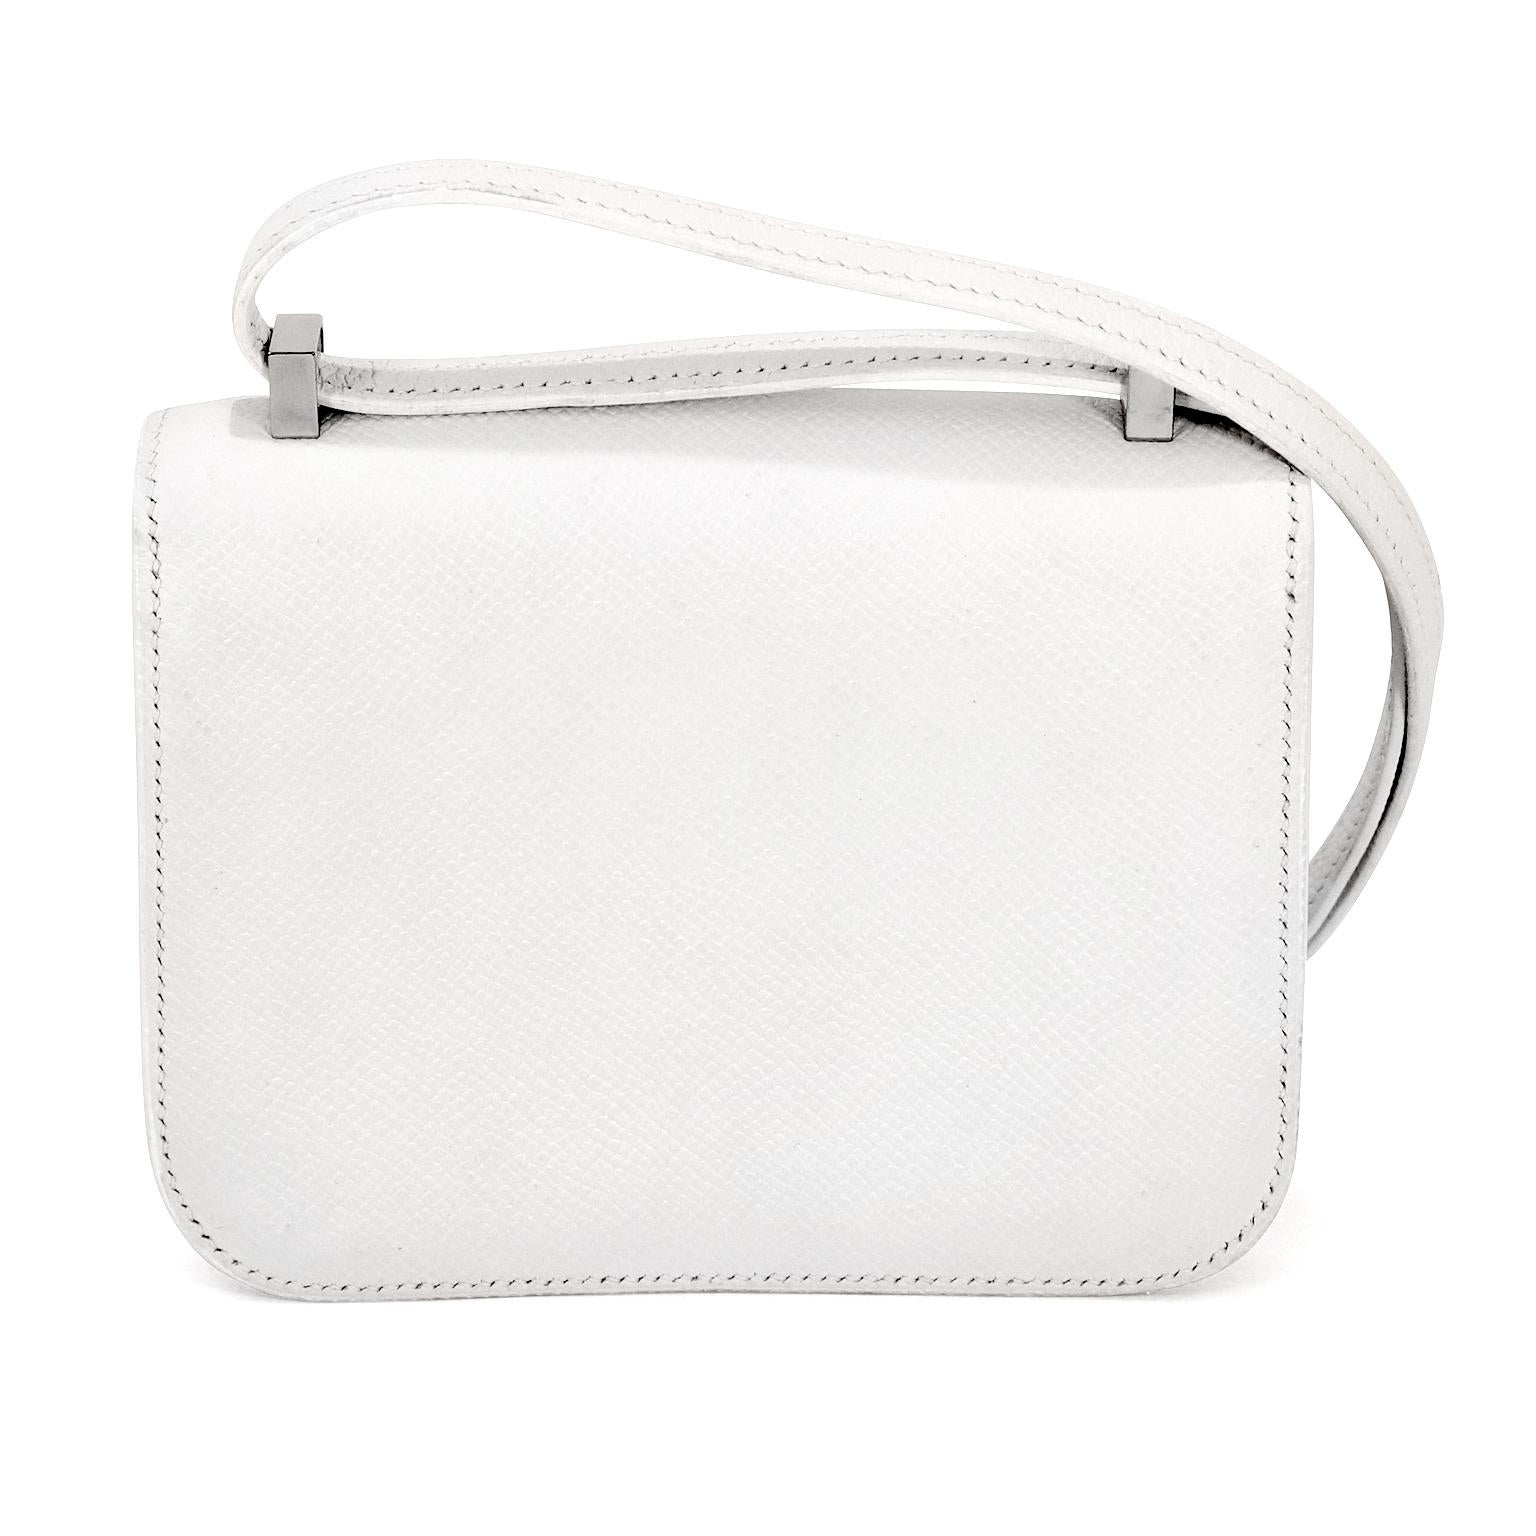 This authentic Hermès White Epsom Leather Micro Constance is in new condition. One of Jackie Kennedy’s favorite Hermès styles, she was often photographed wearing one of the many in her collection. This snowy white version is striking in the micro